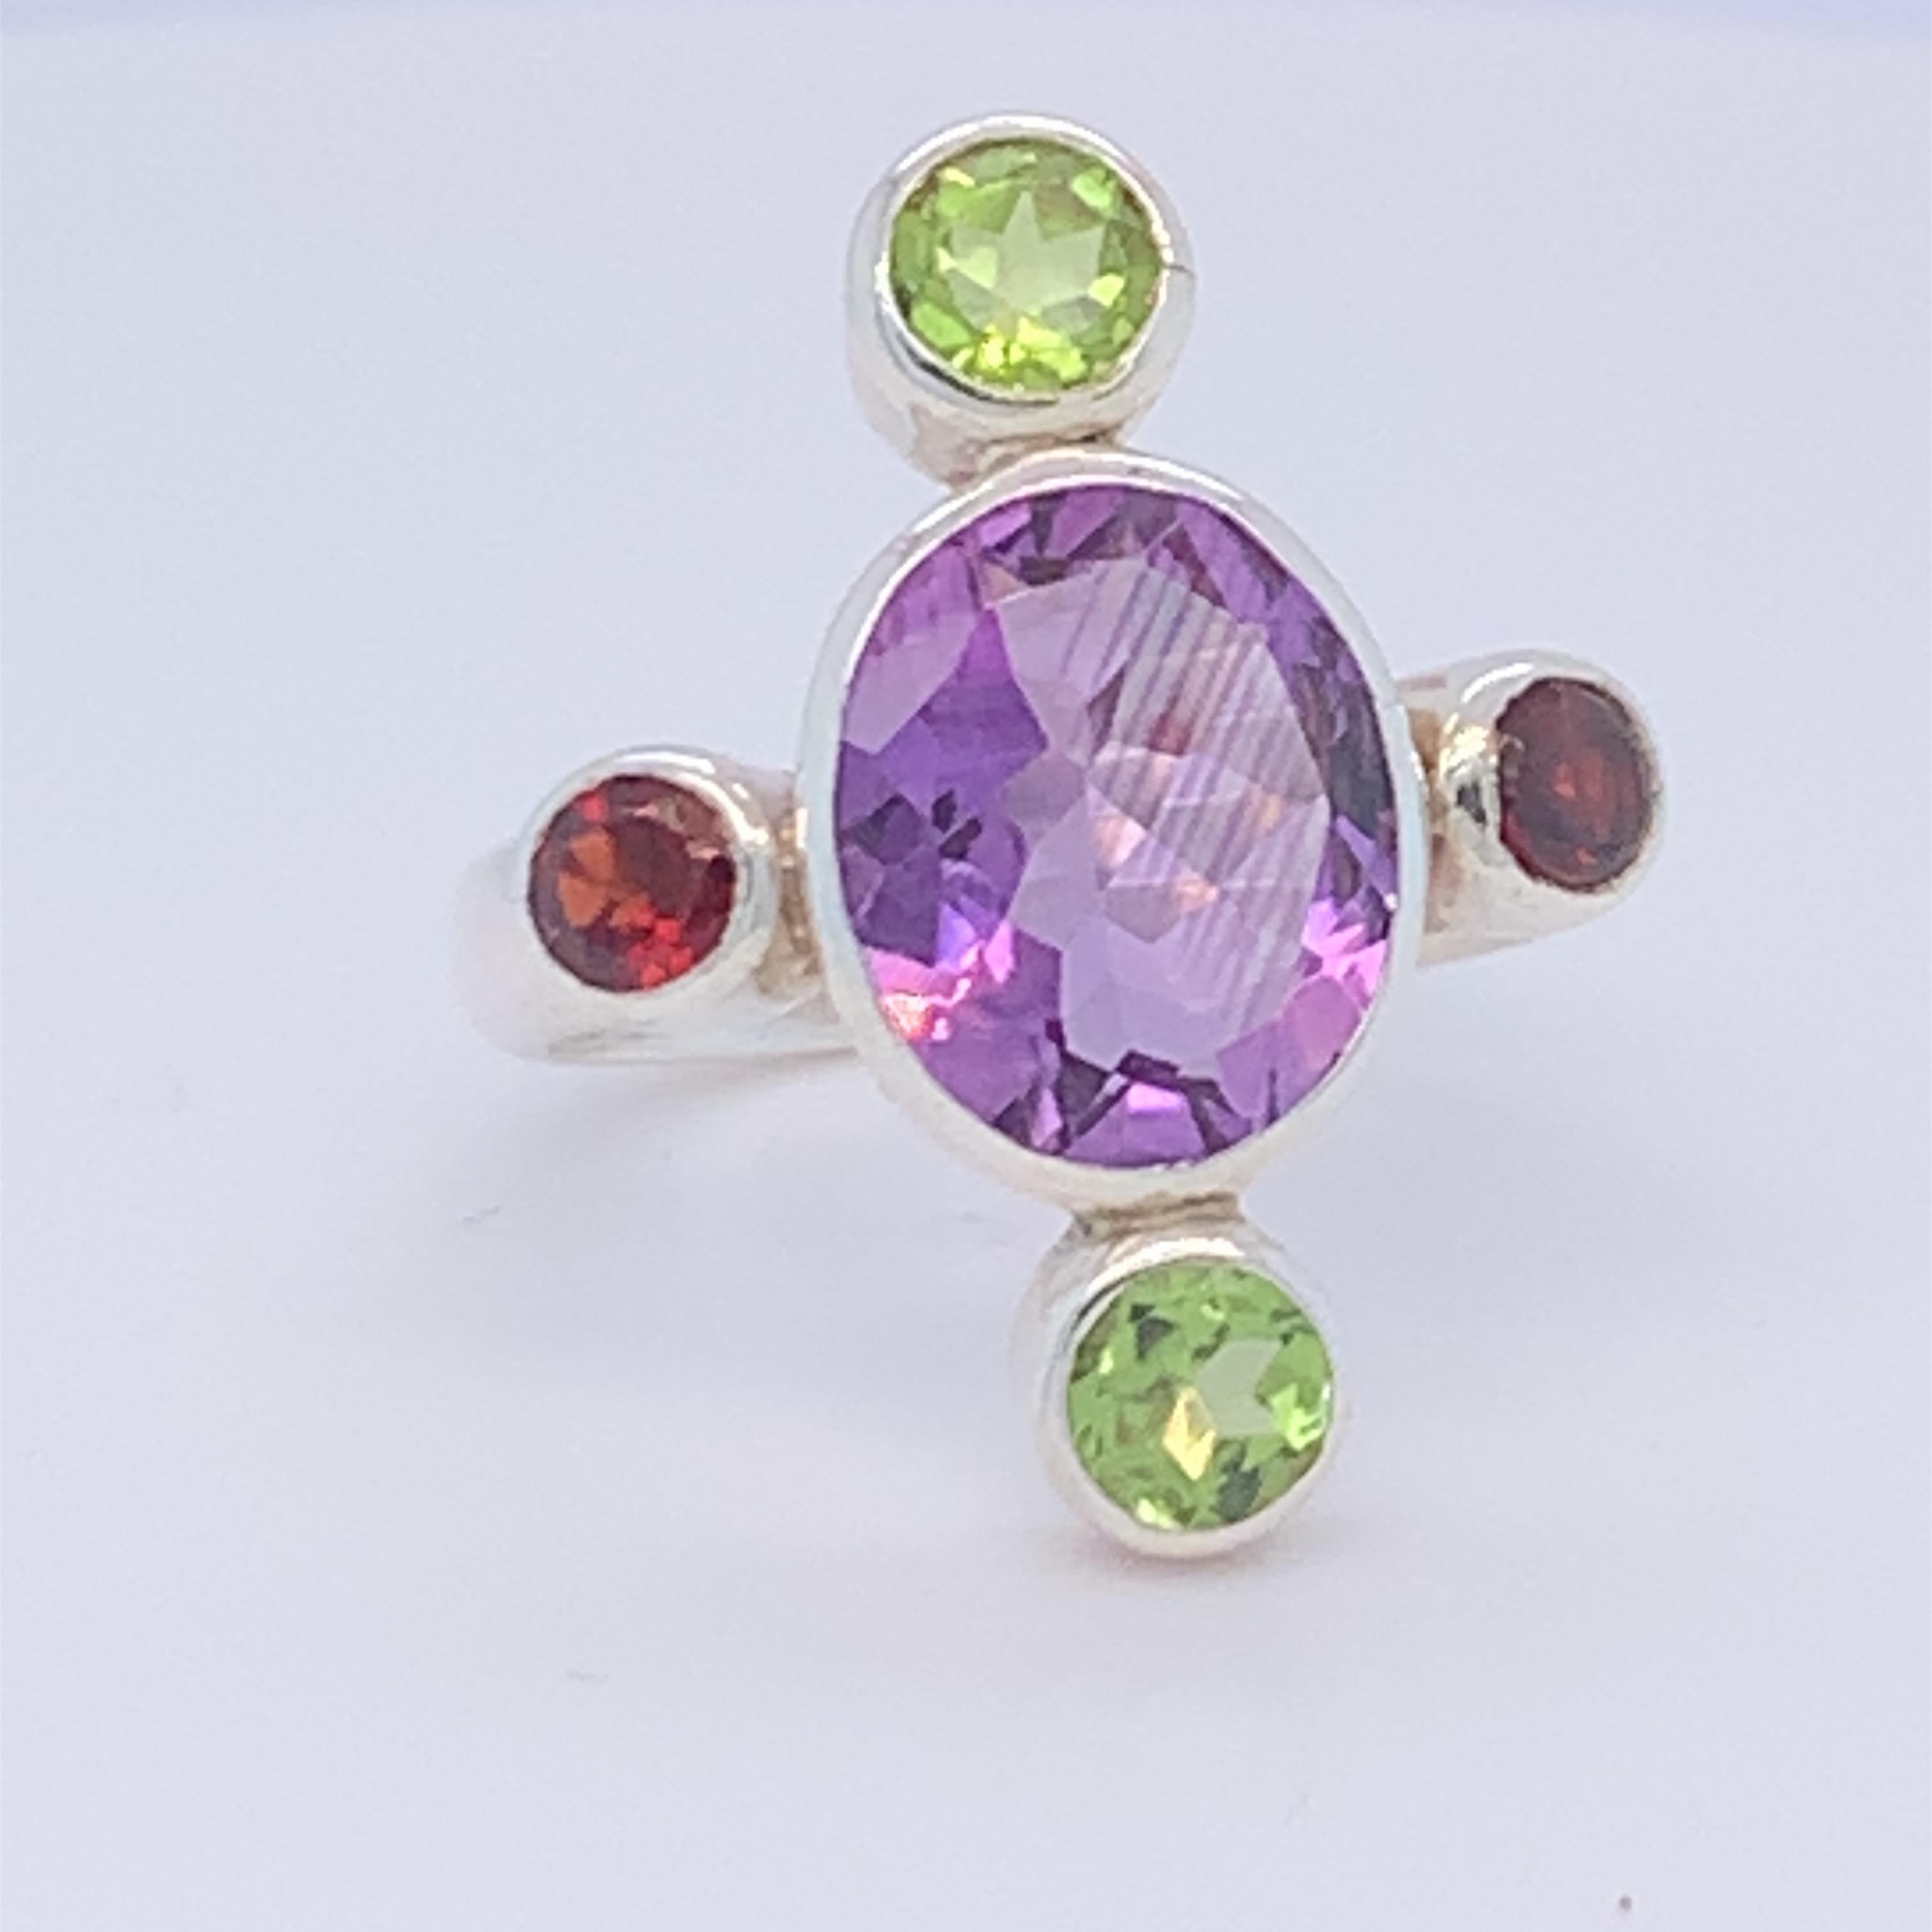 This vibrant five stone ring has oval amethyst as a main stone with peridot and garnet om four sides. It has a unique design and suitable for day wear. Set in sterling silver and hand made by master craftsman.

Total weight of stone: 6.00ct